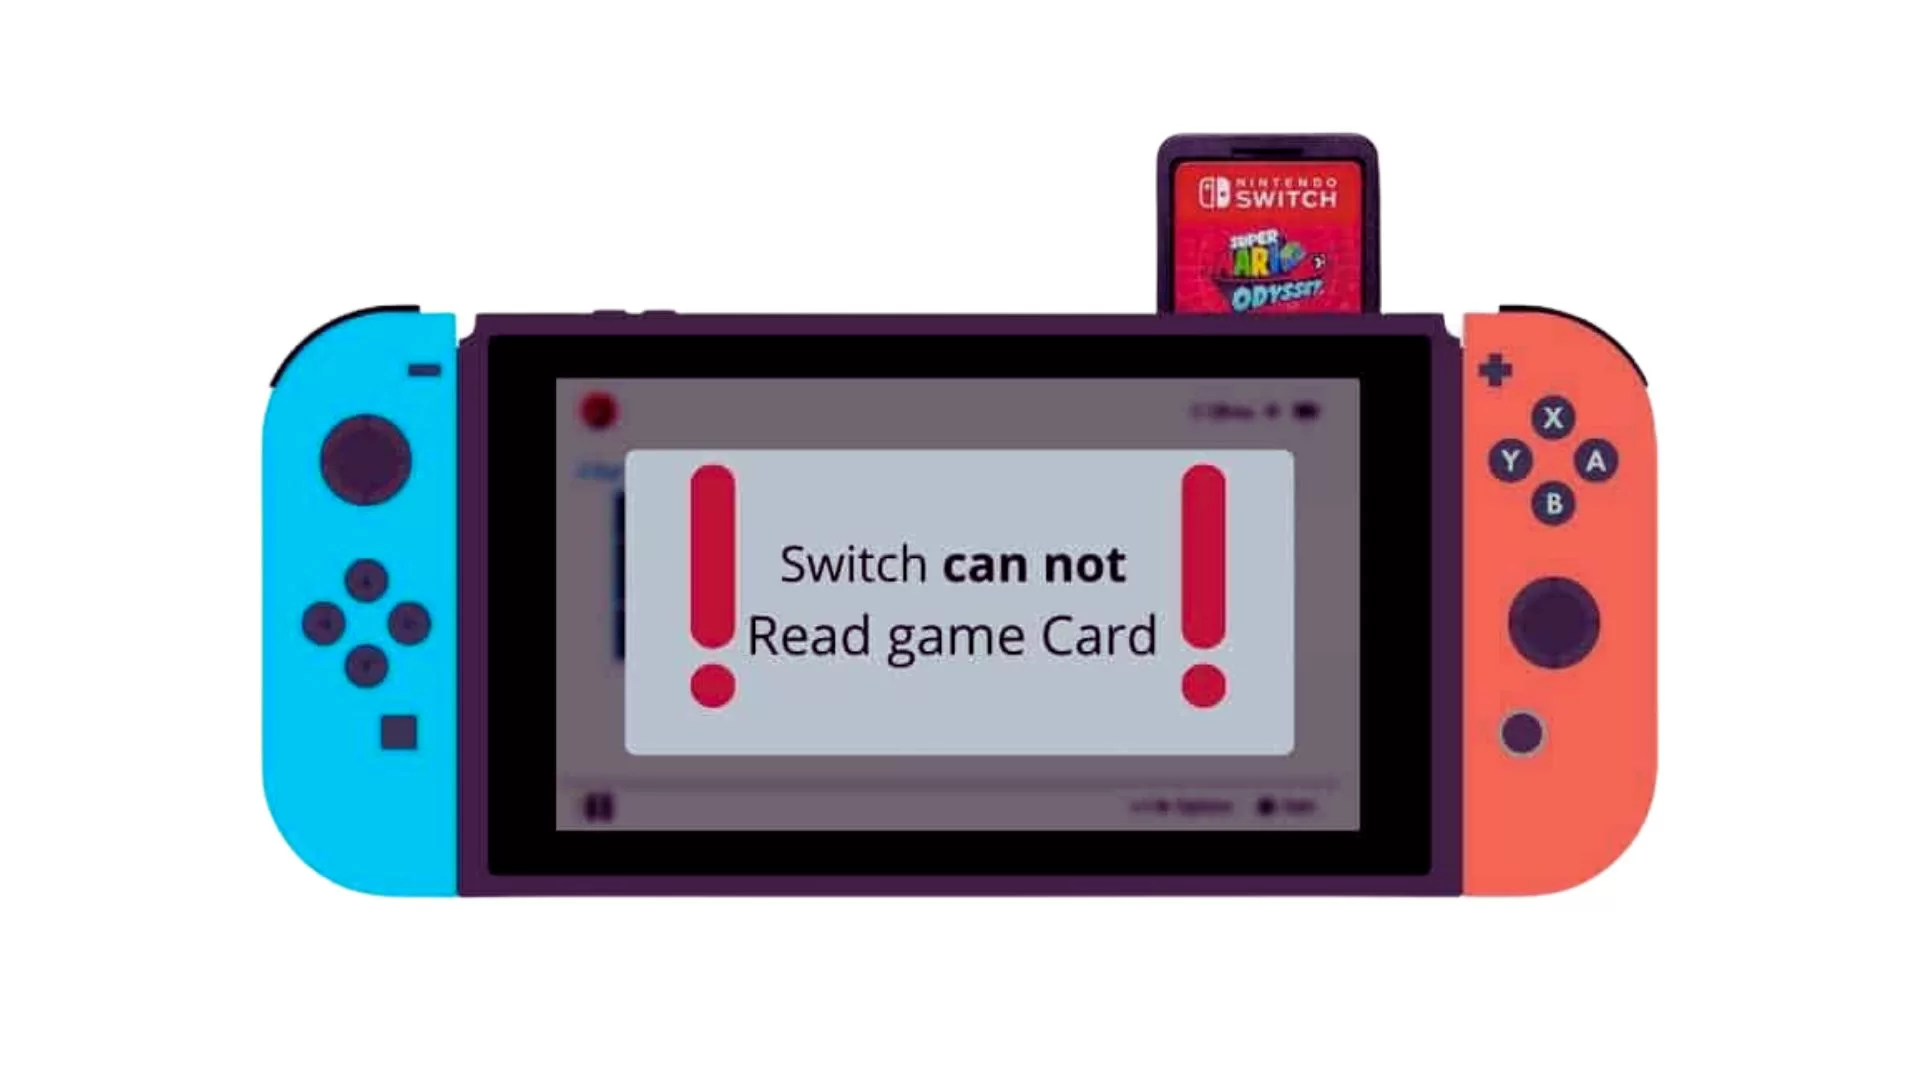 Clean the Game Card and Switch Game Card Slot